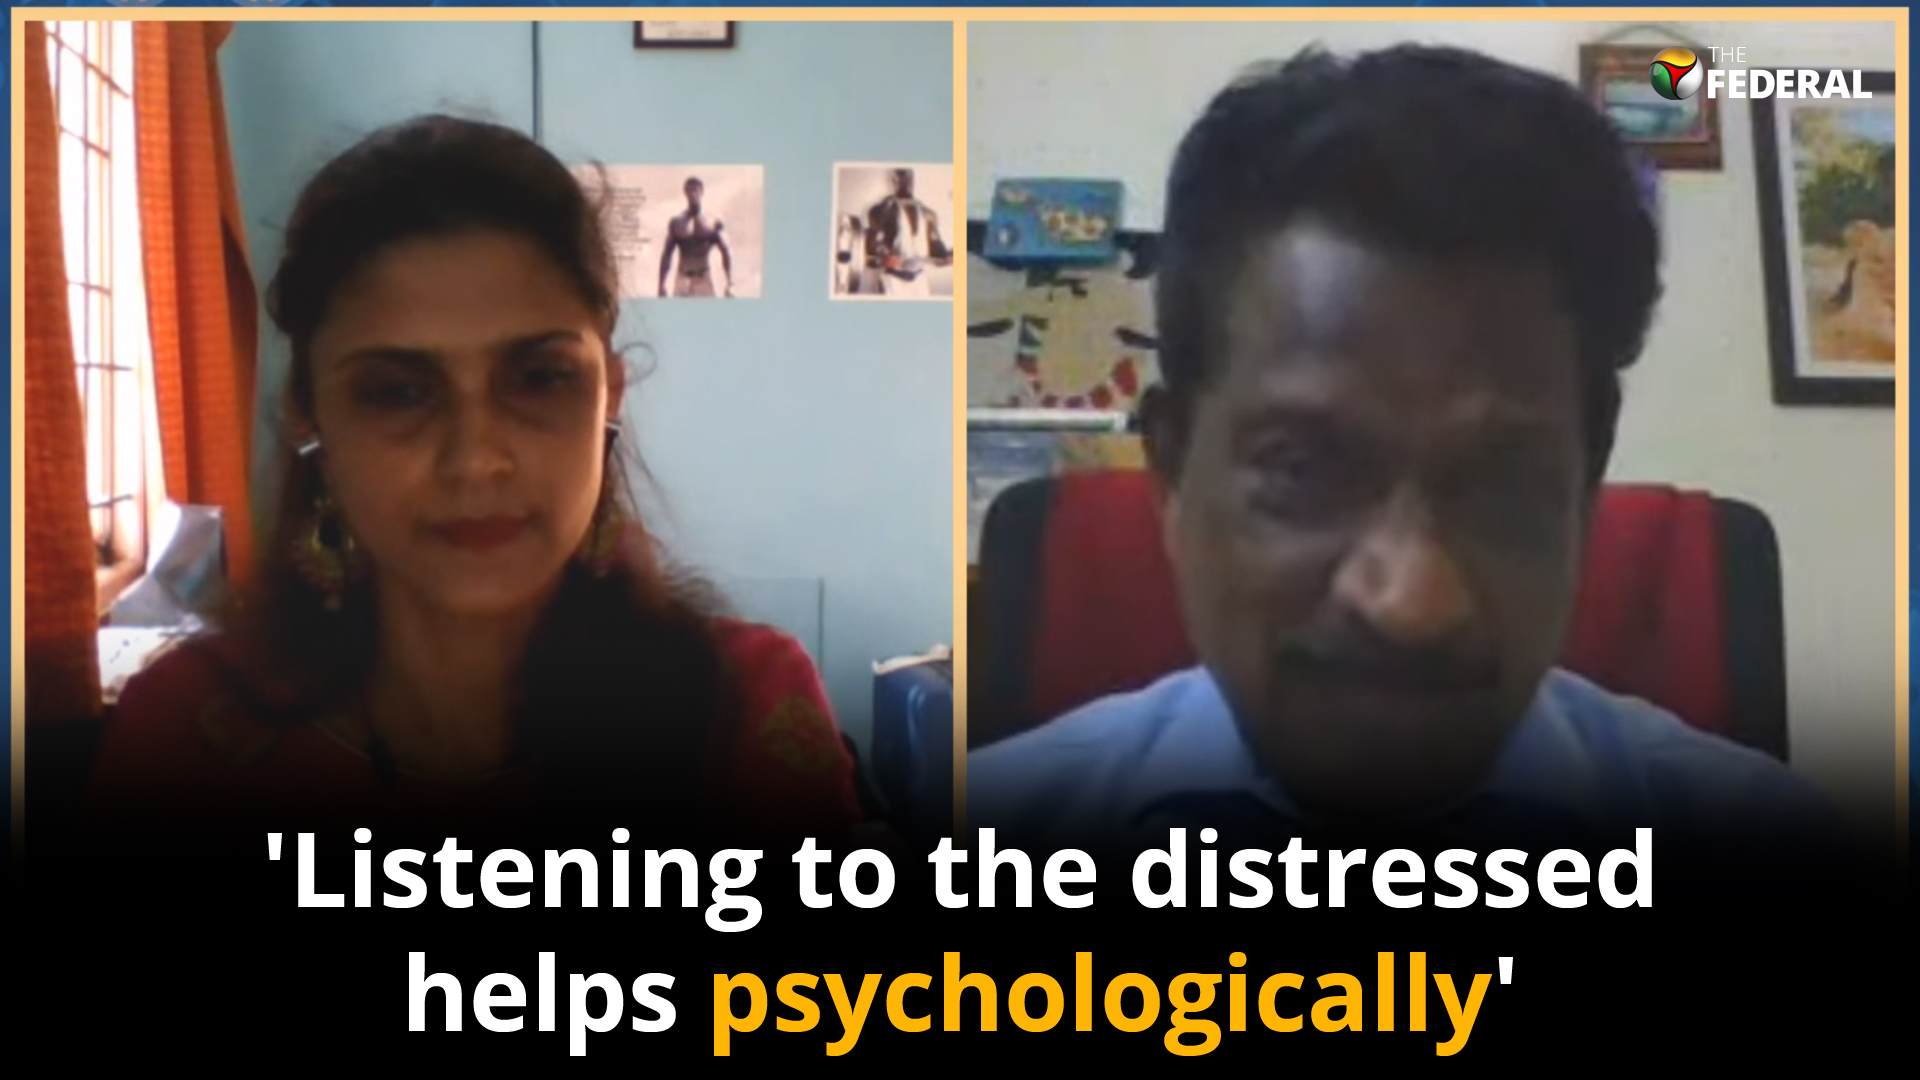 COVID-19: Listening to the distressed helps psychologically